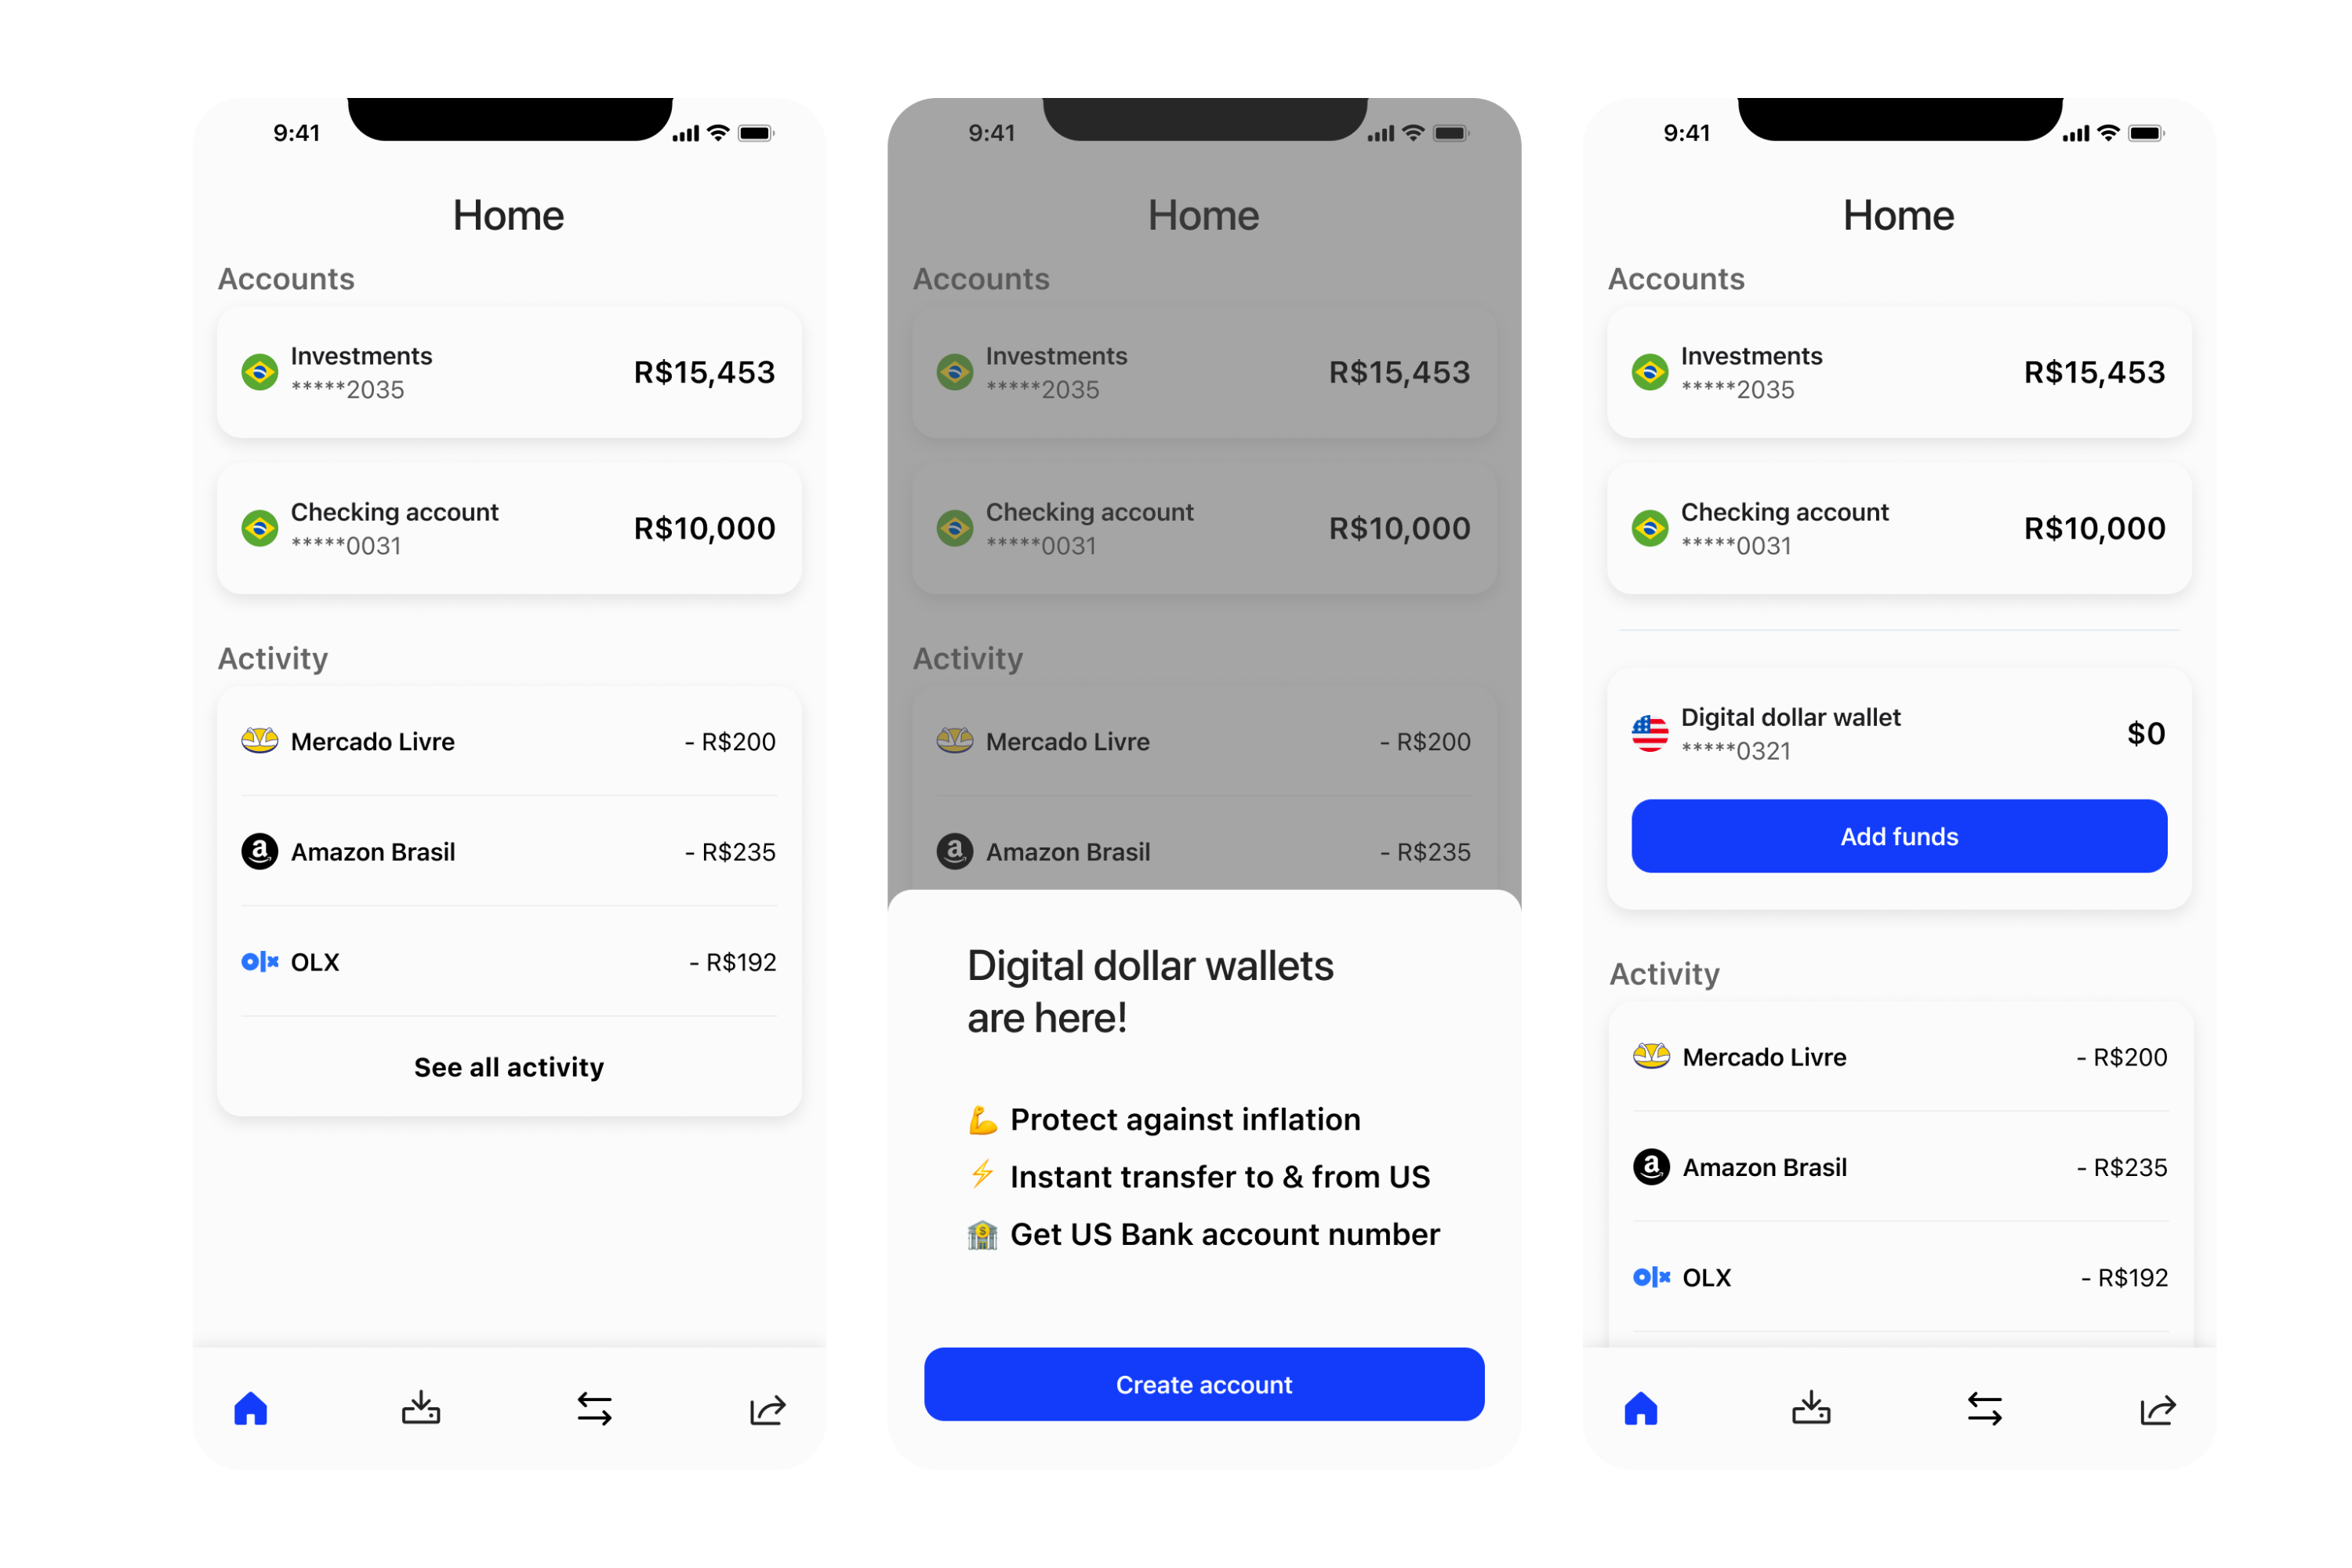 The UI flow will look something like this. You will offer digital dollar accounts in your app interface, and if the user decides to create an account, you (as the integrator), will make a call to Caliza's API to create a new beneficiary with the user's infomration.